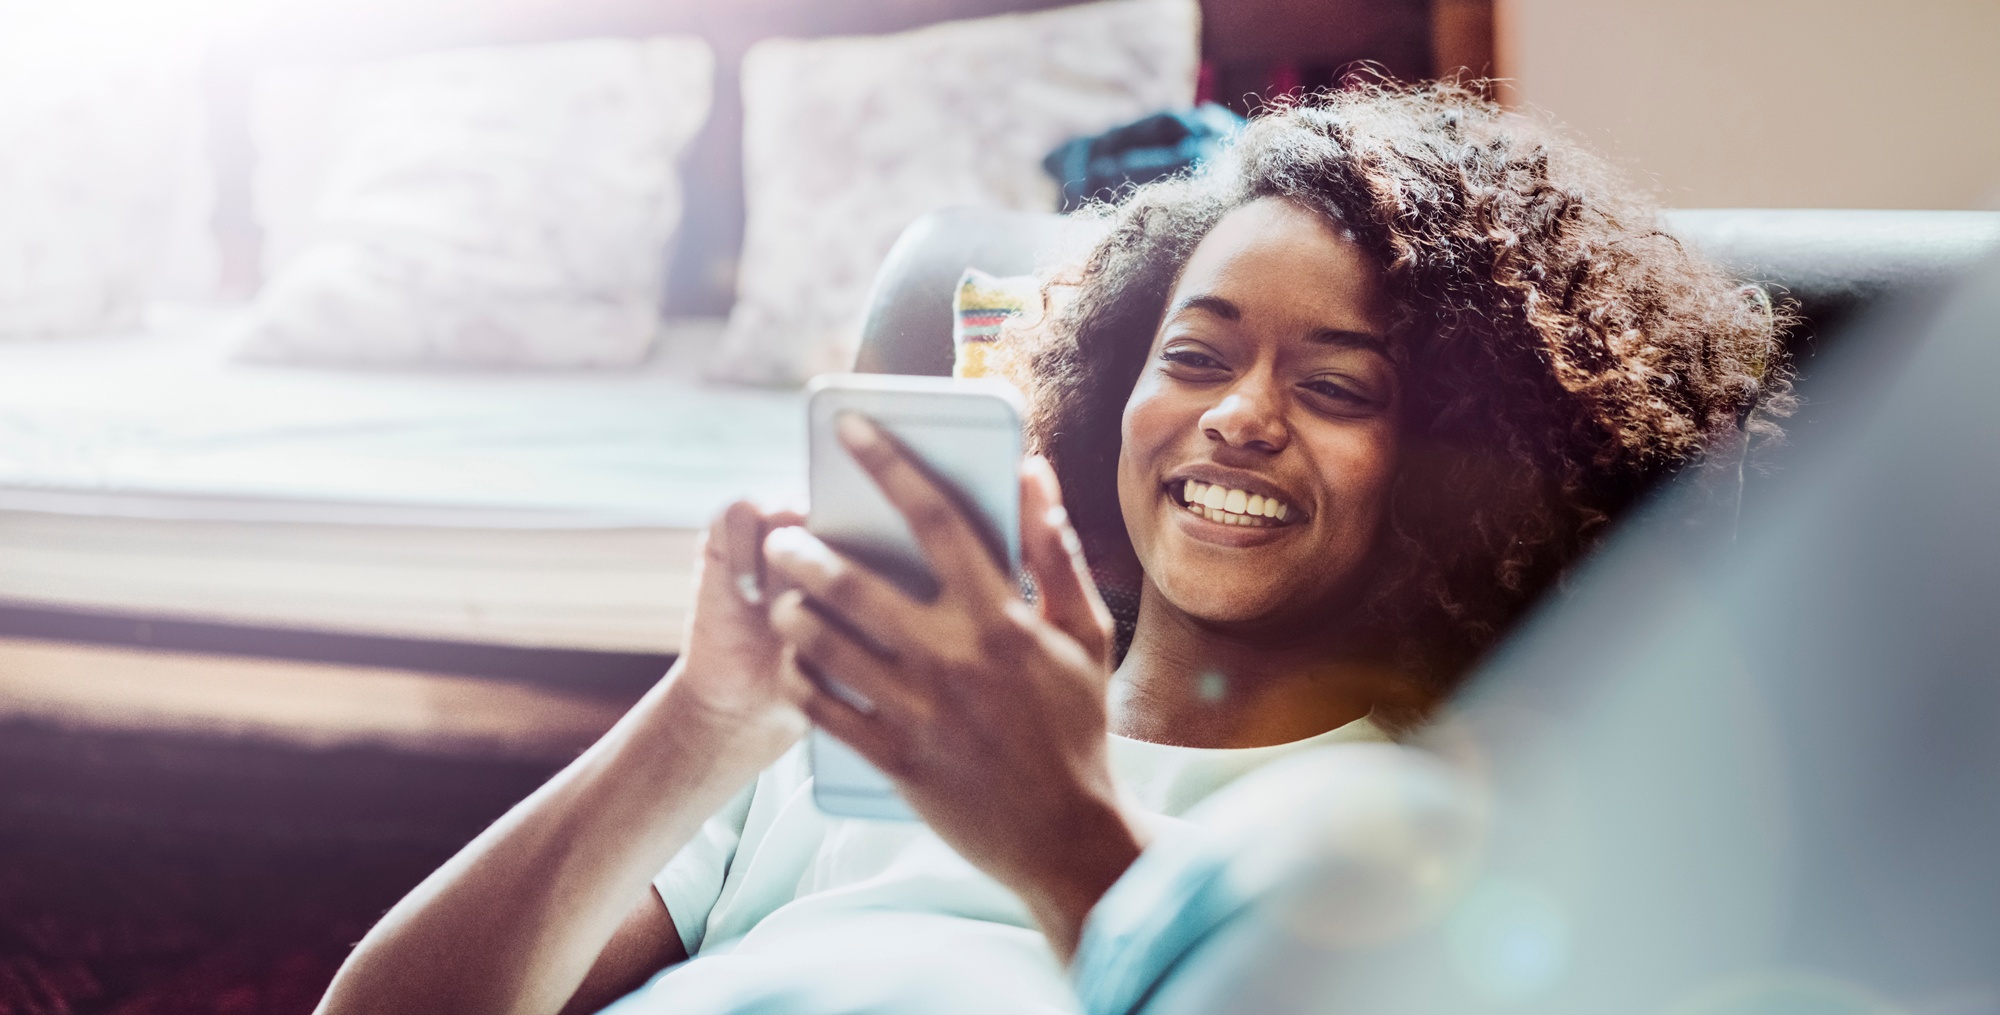 woman-laying-on-couch-smartphone-smiling.jpg